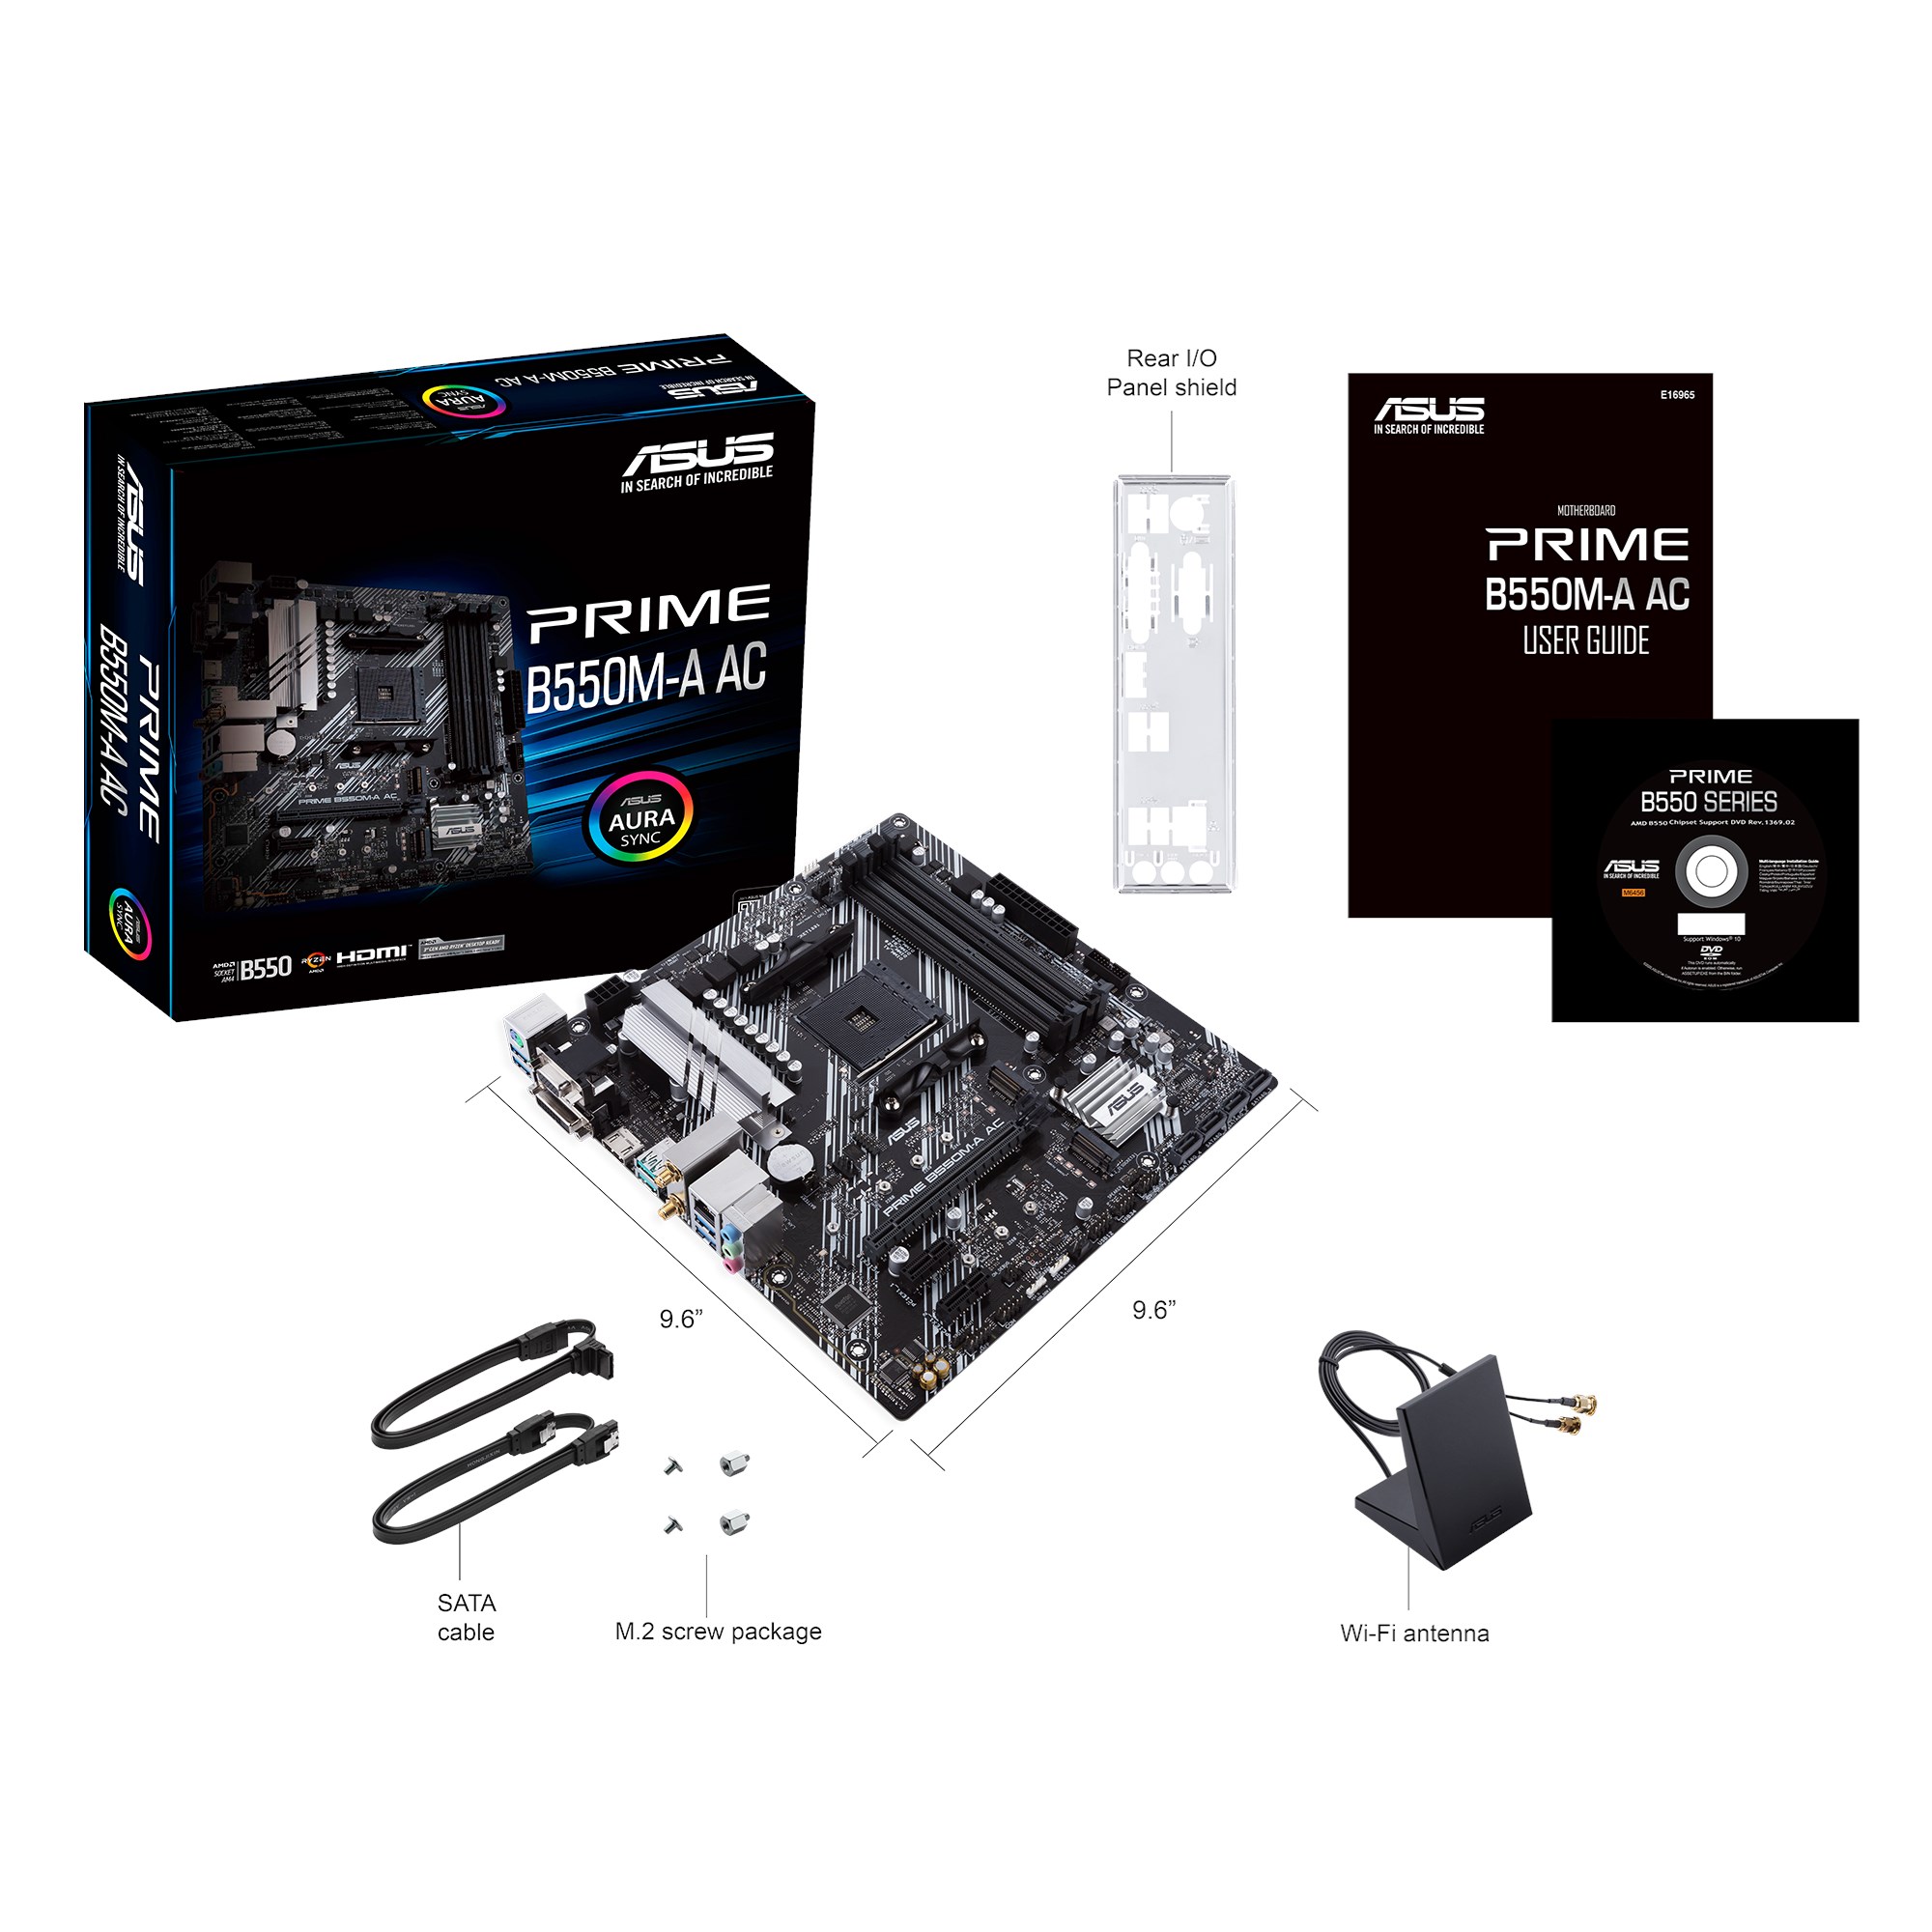 PRIME B550M-A AC｜Motherboards｜ASUS Global